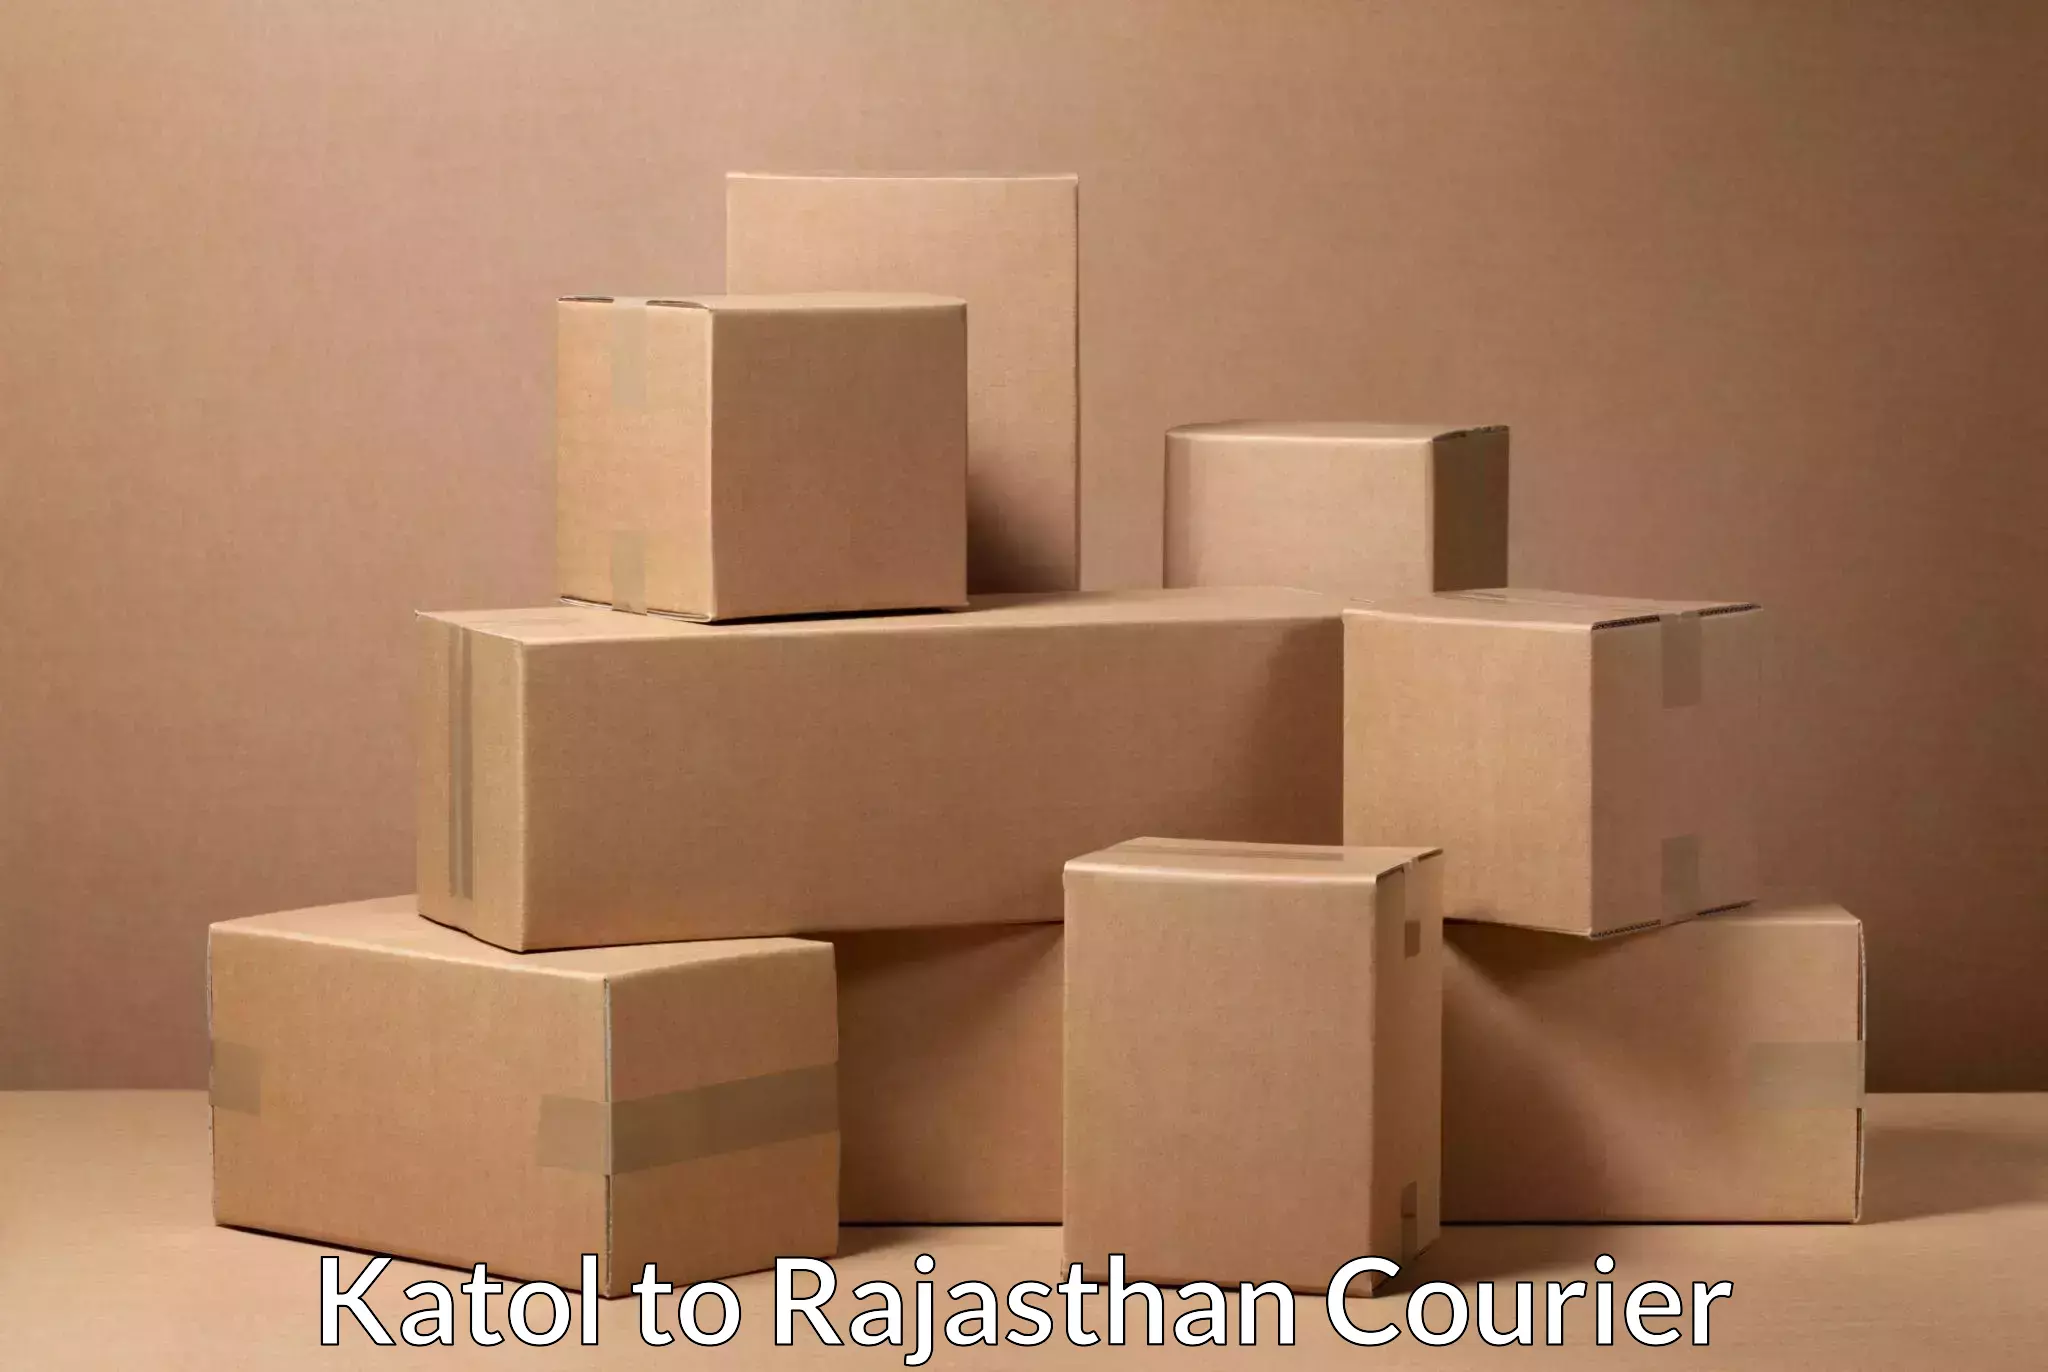 Parcel service for businesses Katol to Rajasthan